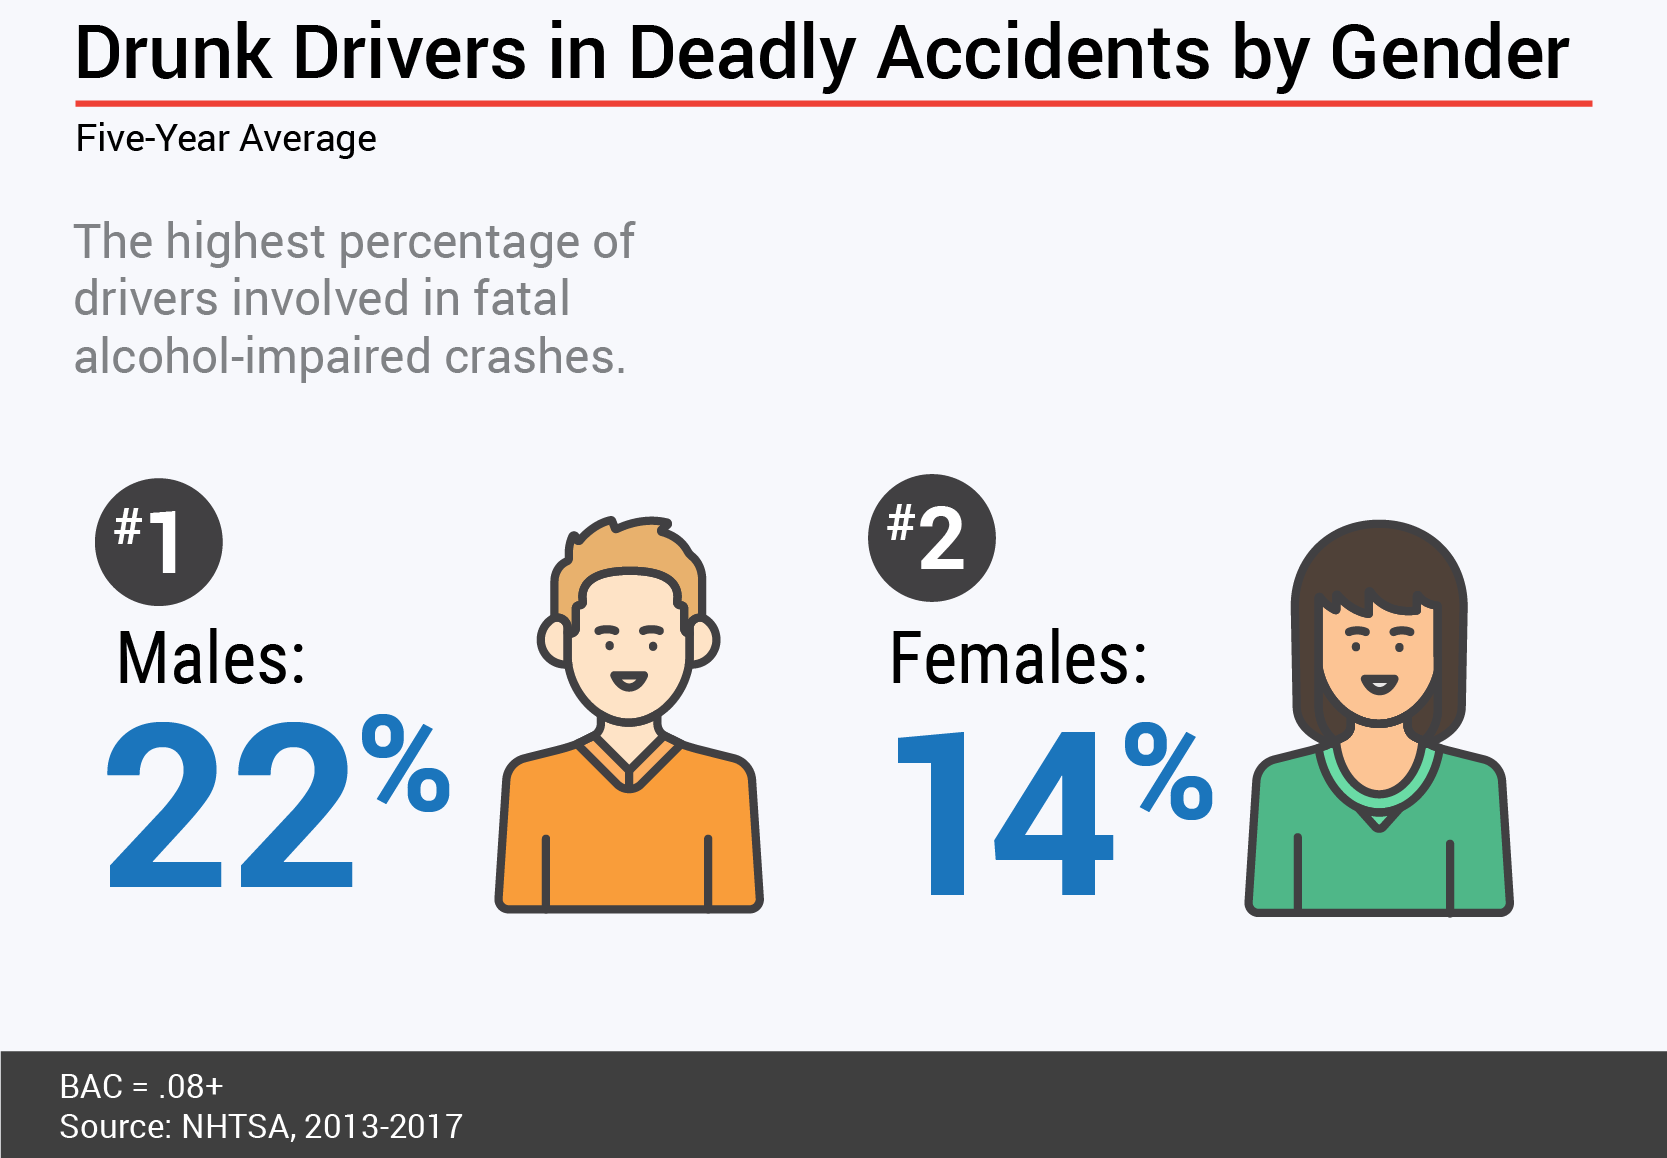 Drunk Driving Study - Fatal crashes by gender